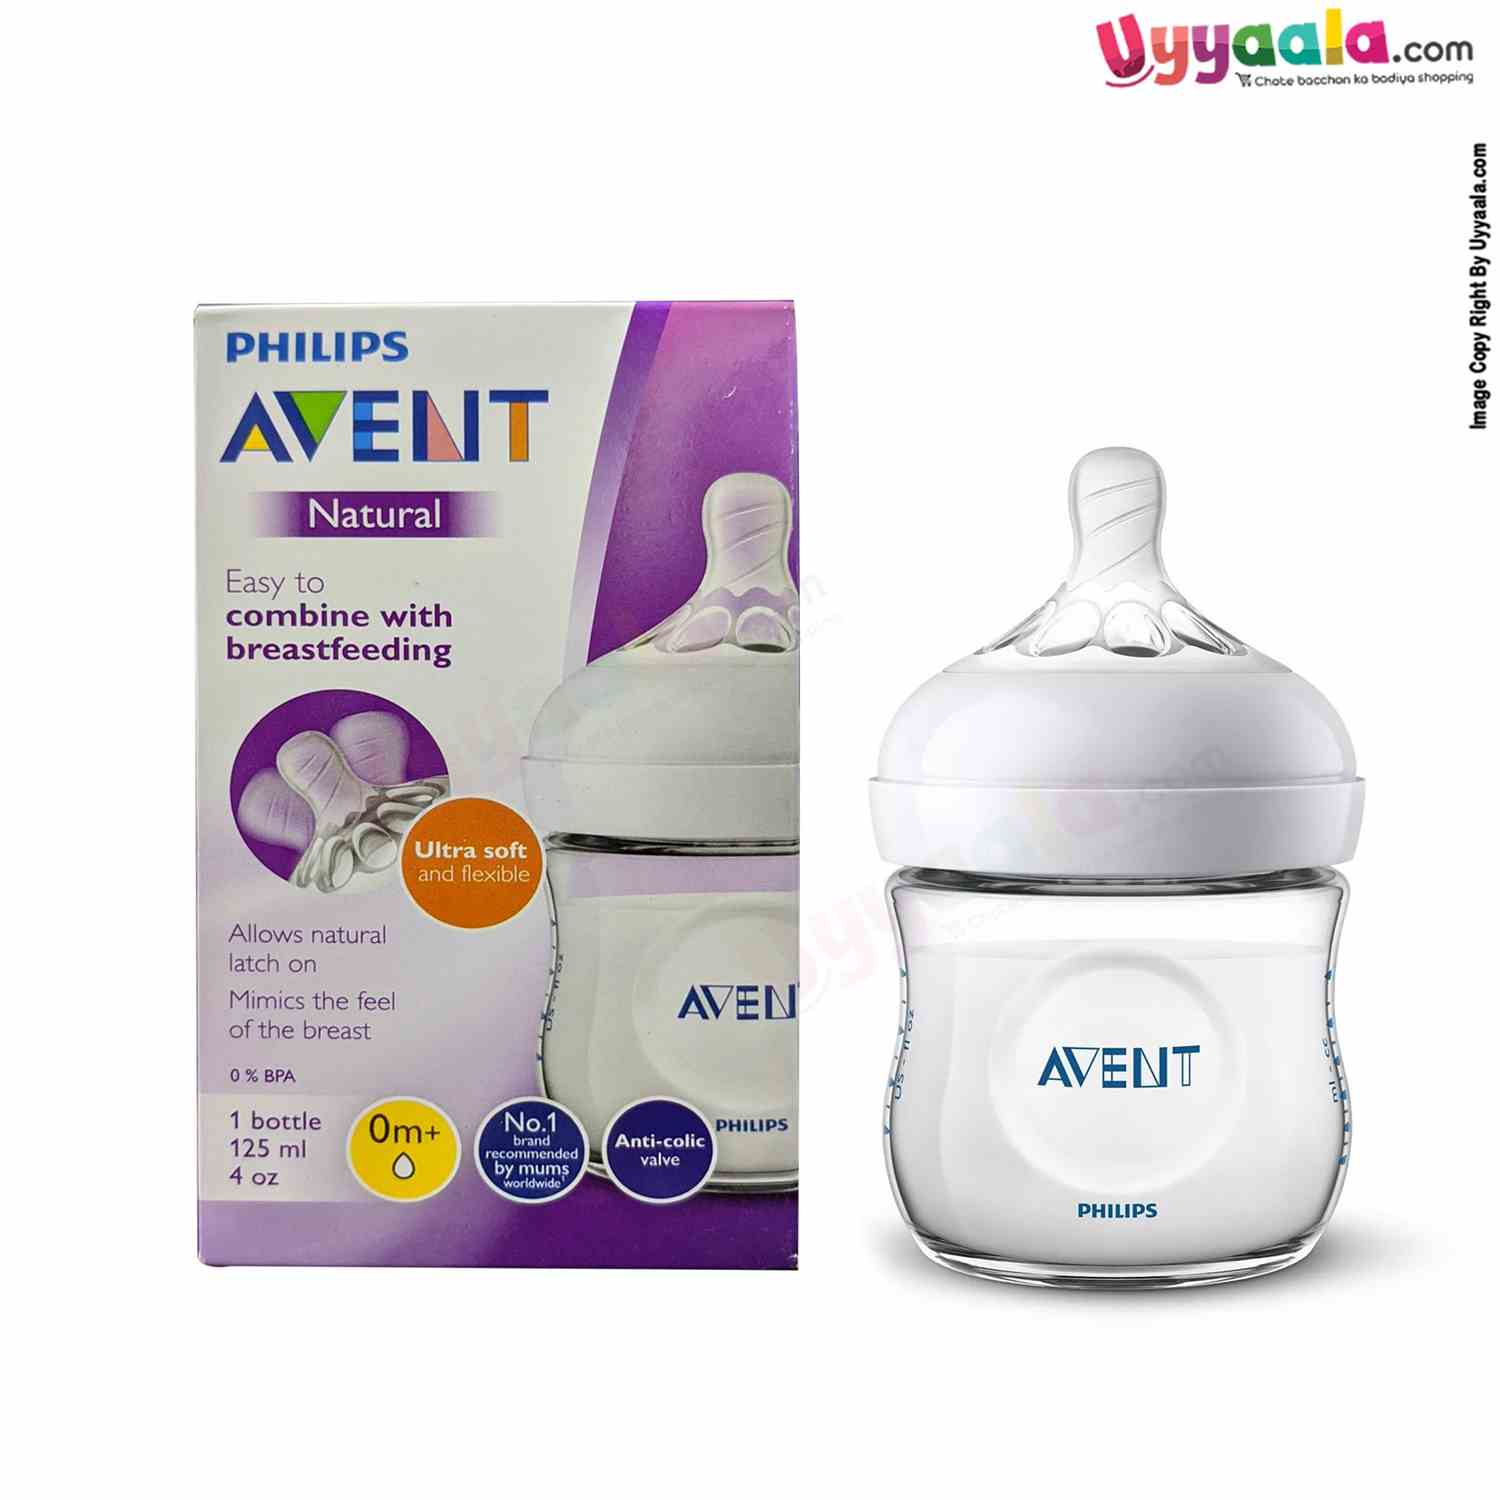 Buy Philips Avent Baby Milk Bottle & Baby Care Items Online in India